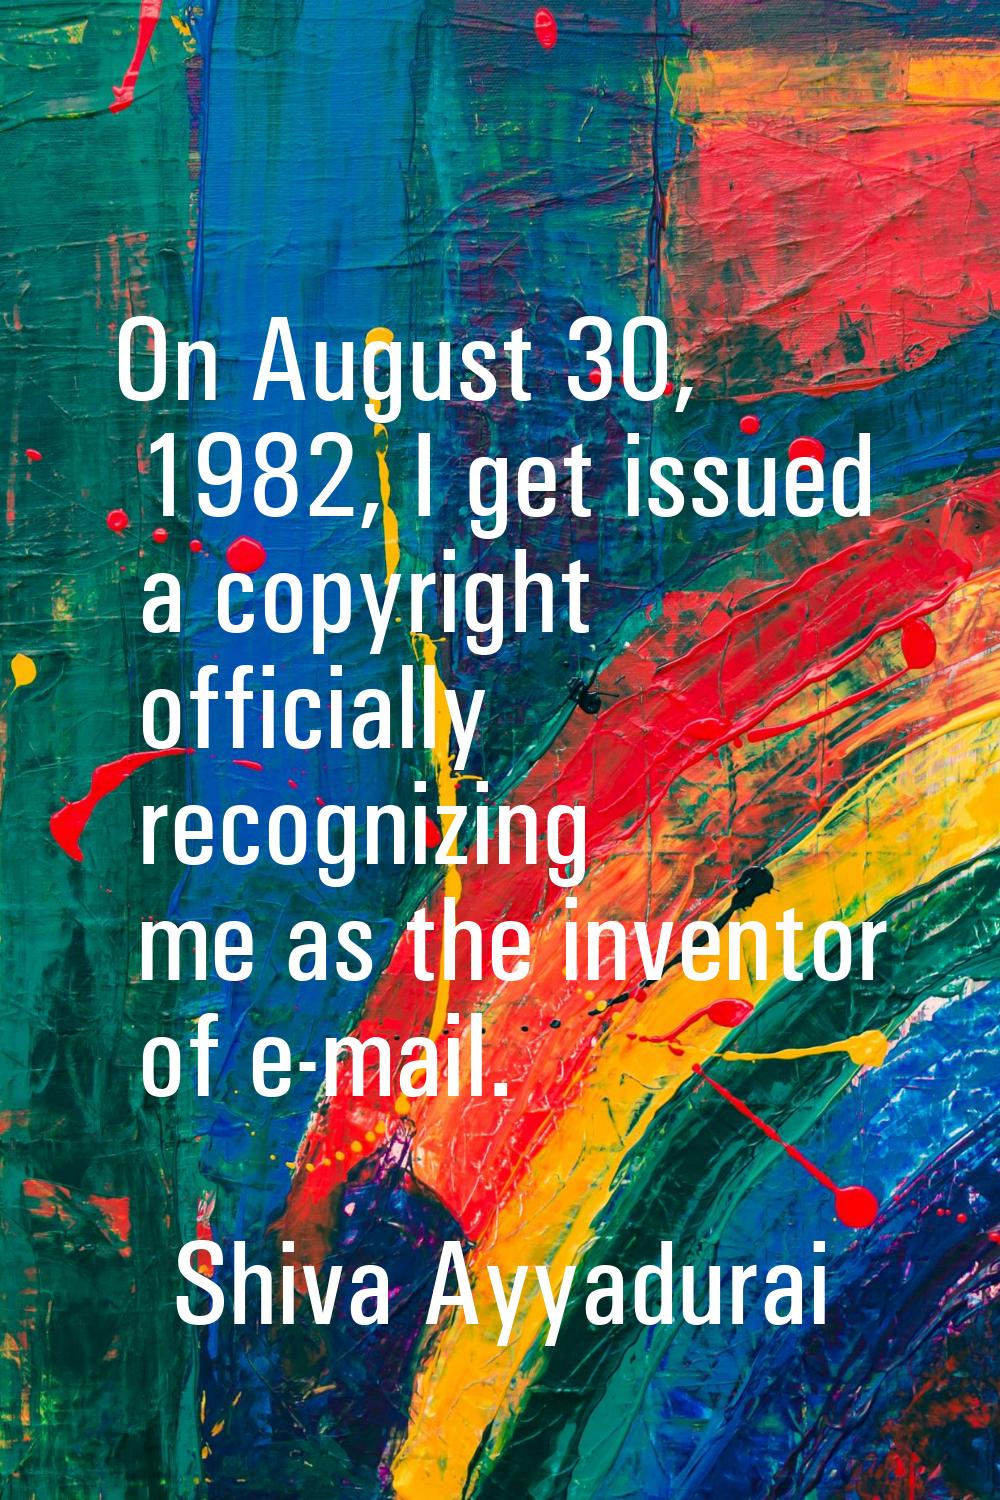 On August 30, 1982, I get issued a copyright officially recognizing me as the inventor of e-mail.